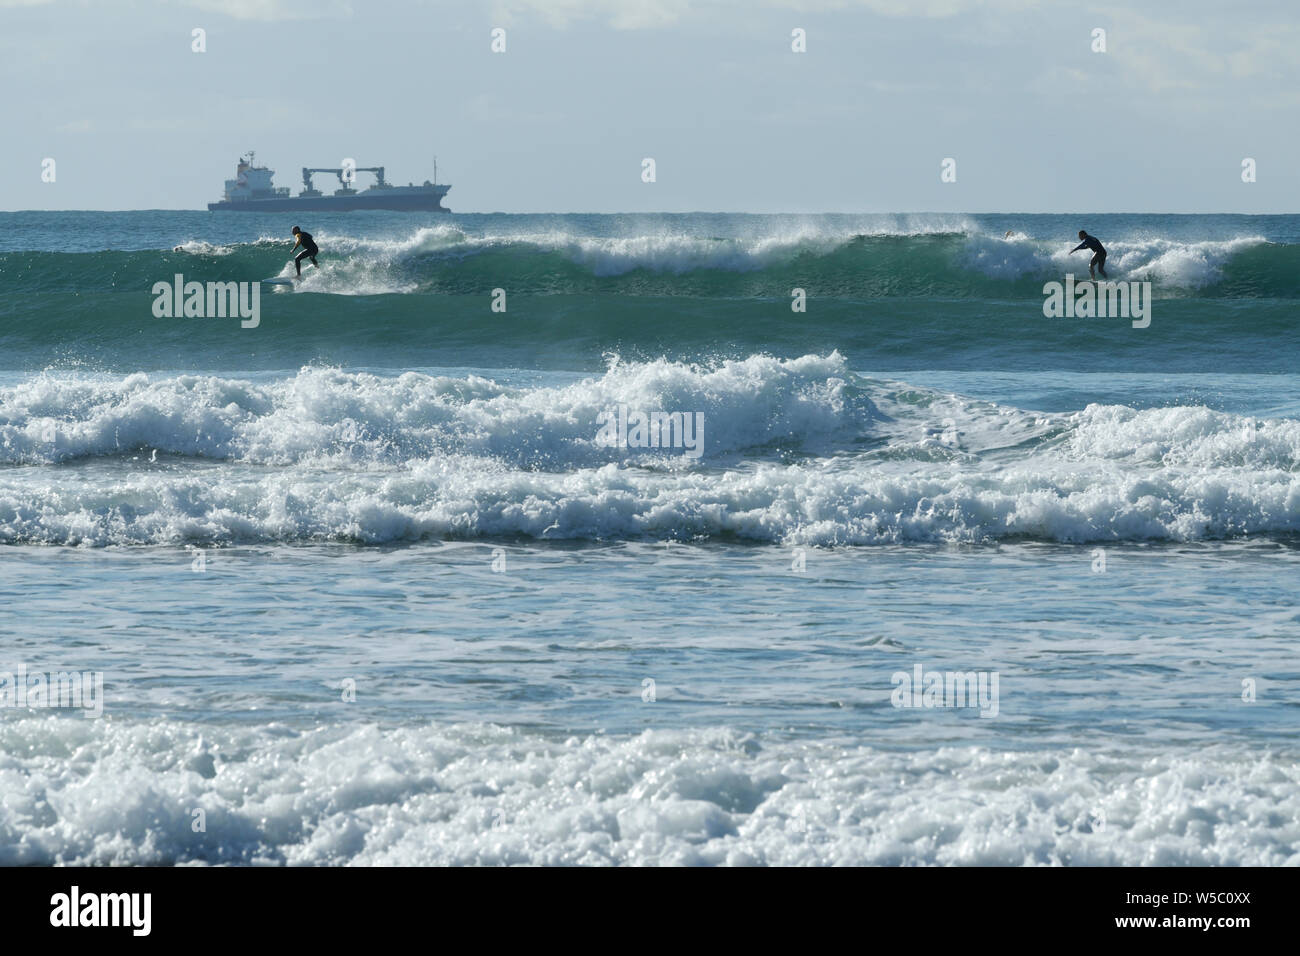 Durban, KwaZulu-Natal, South Africa, two male surfers surfing wave, Battery beach, city, landscape, sport, Africa, lifestyle, people Stock Photo